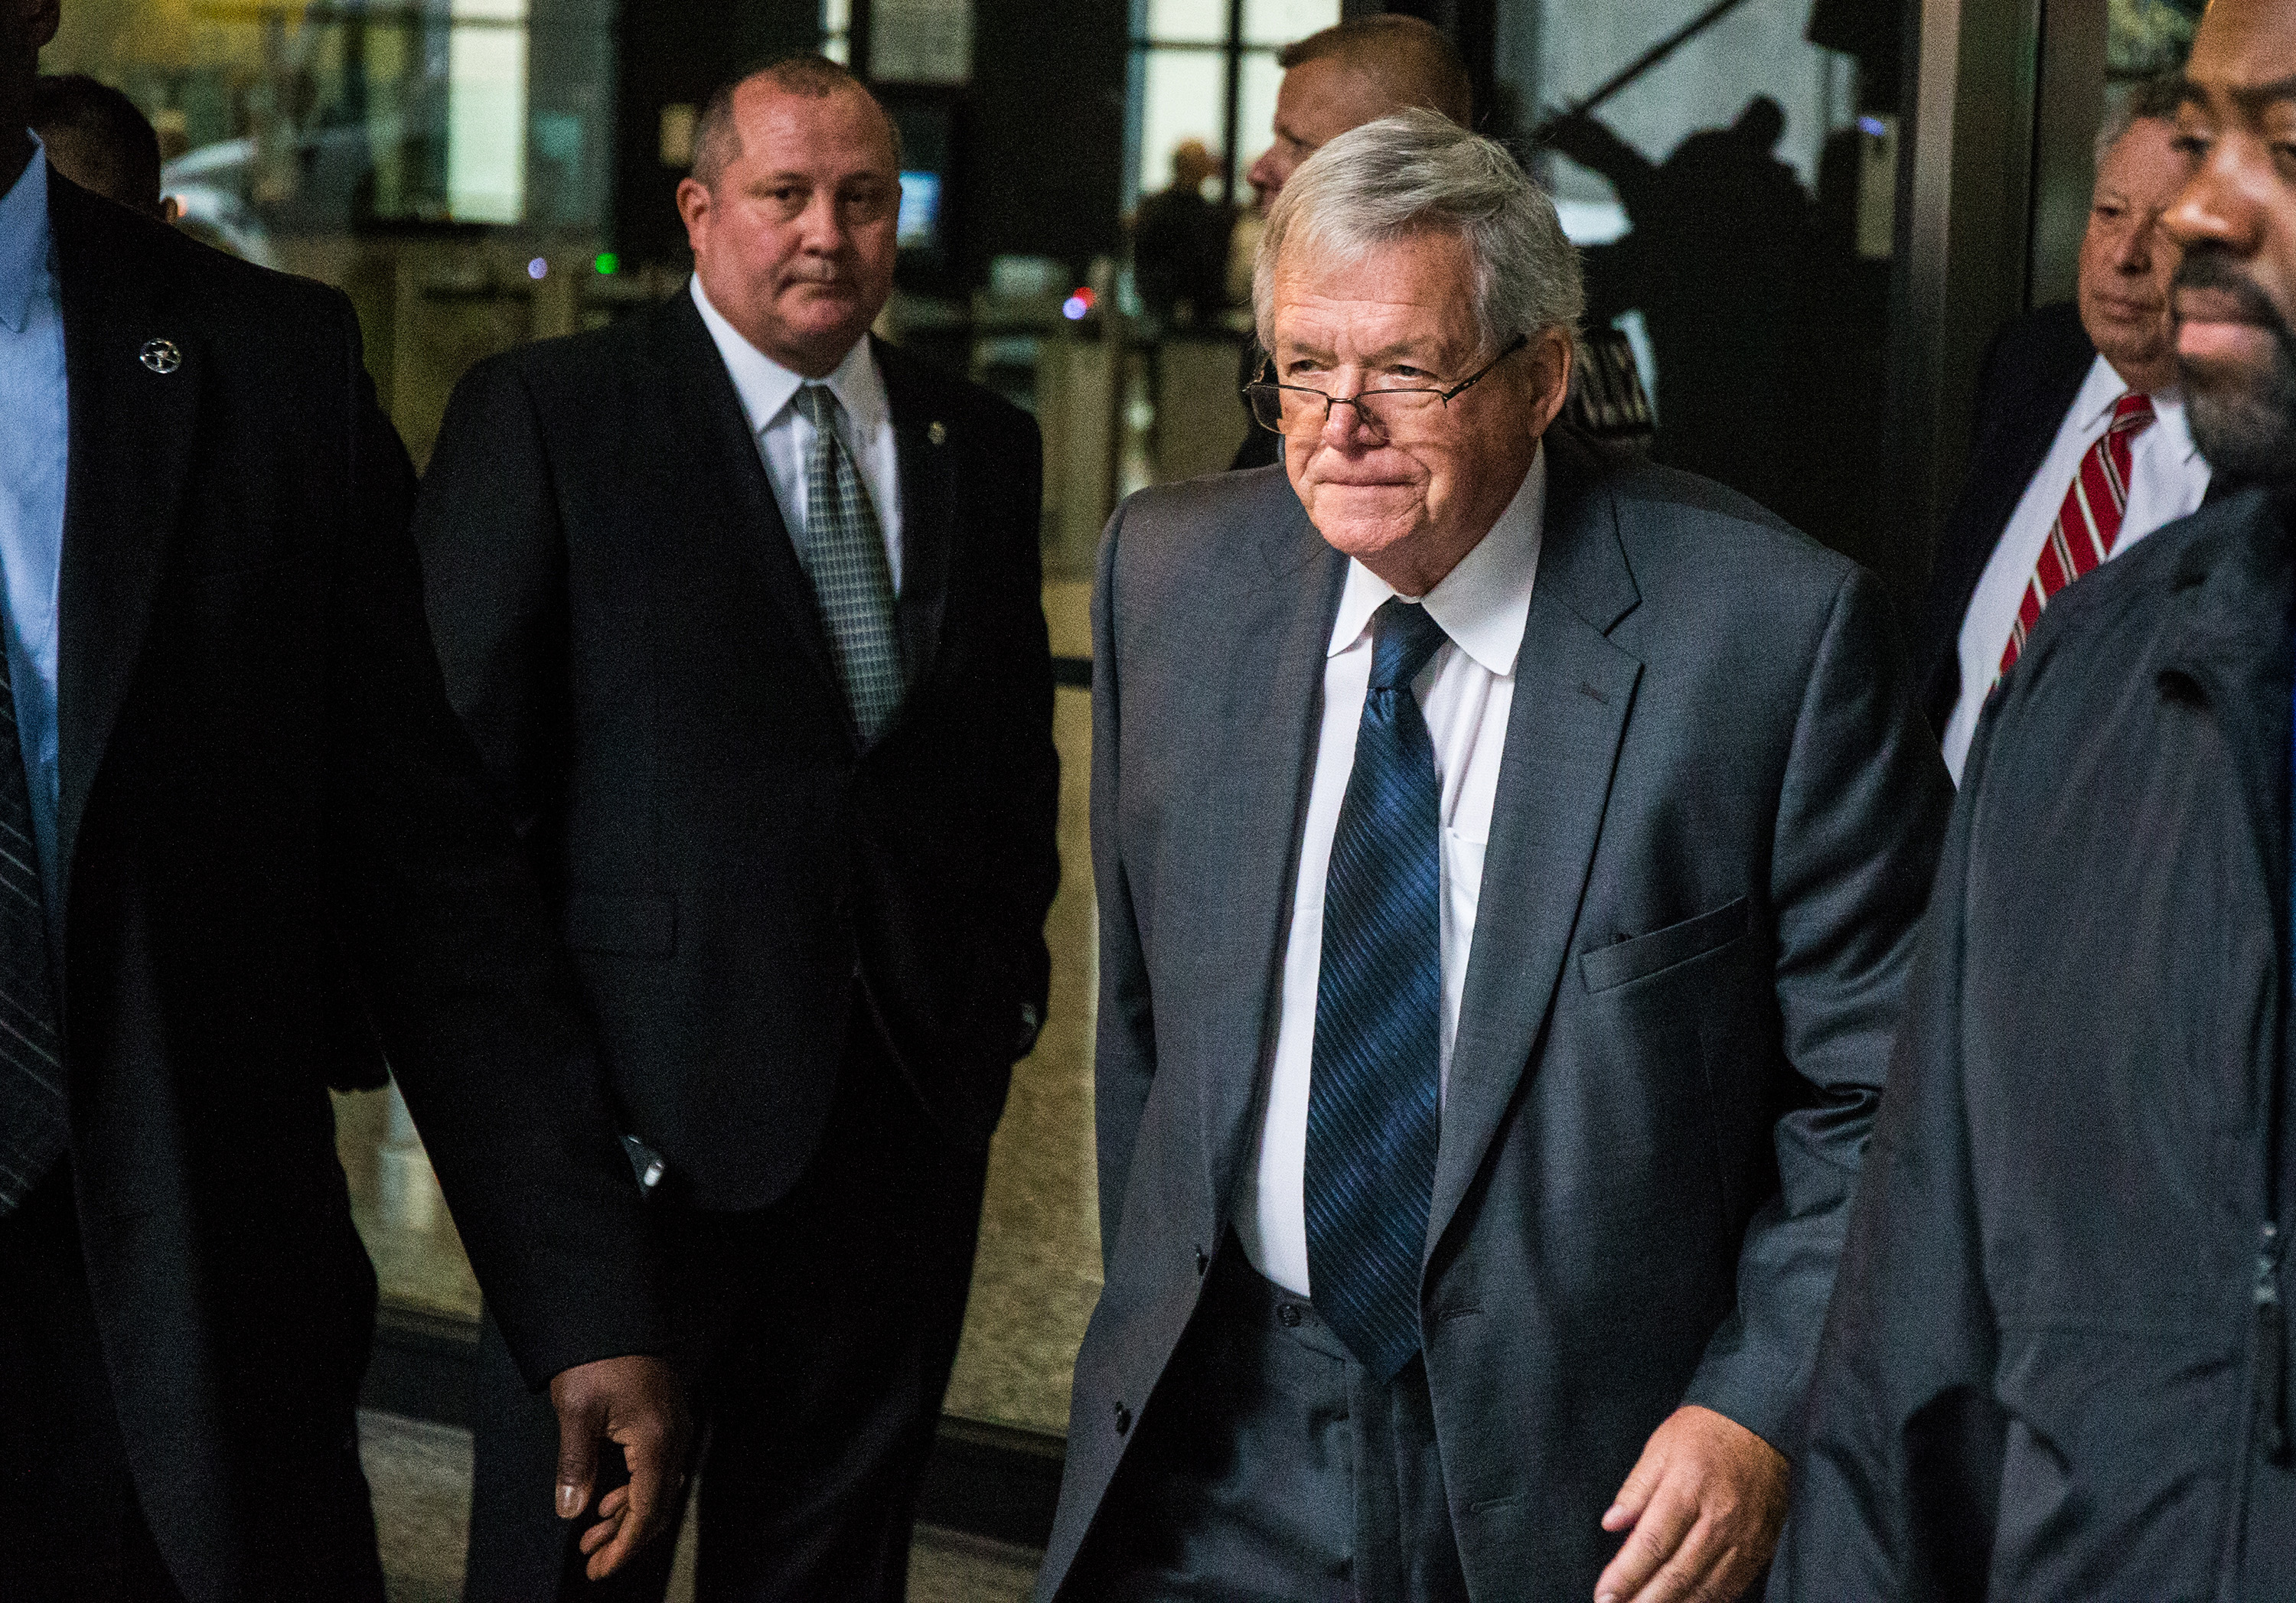 Former U.S. House Speaker Dennis Hastert leaves after a guilty plea at Dirksen U.S. Courthouse on Wednesday, Oct. 28, 2015 in Chicago. (Zbigniew Bzdak—Chicago Tribune/TNS/Getty Images)